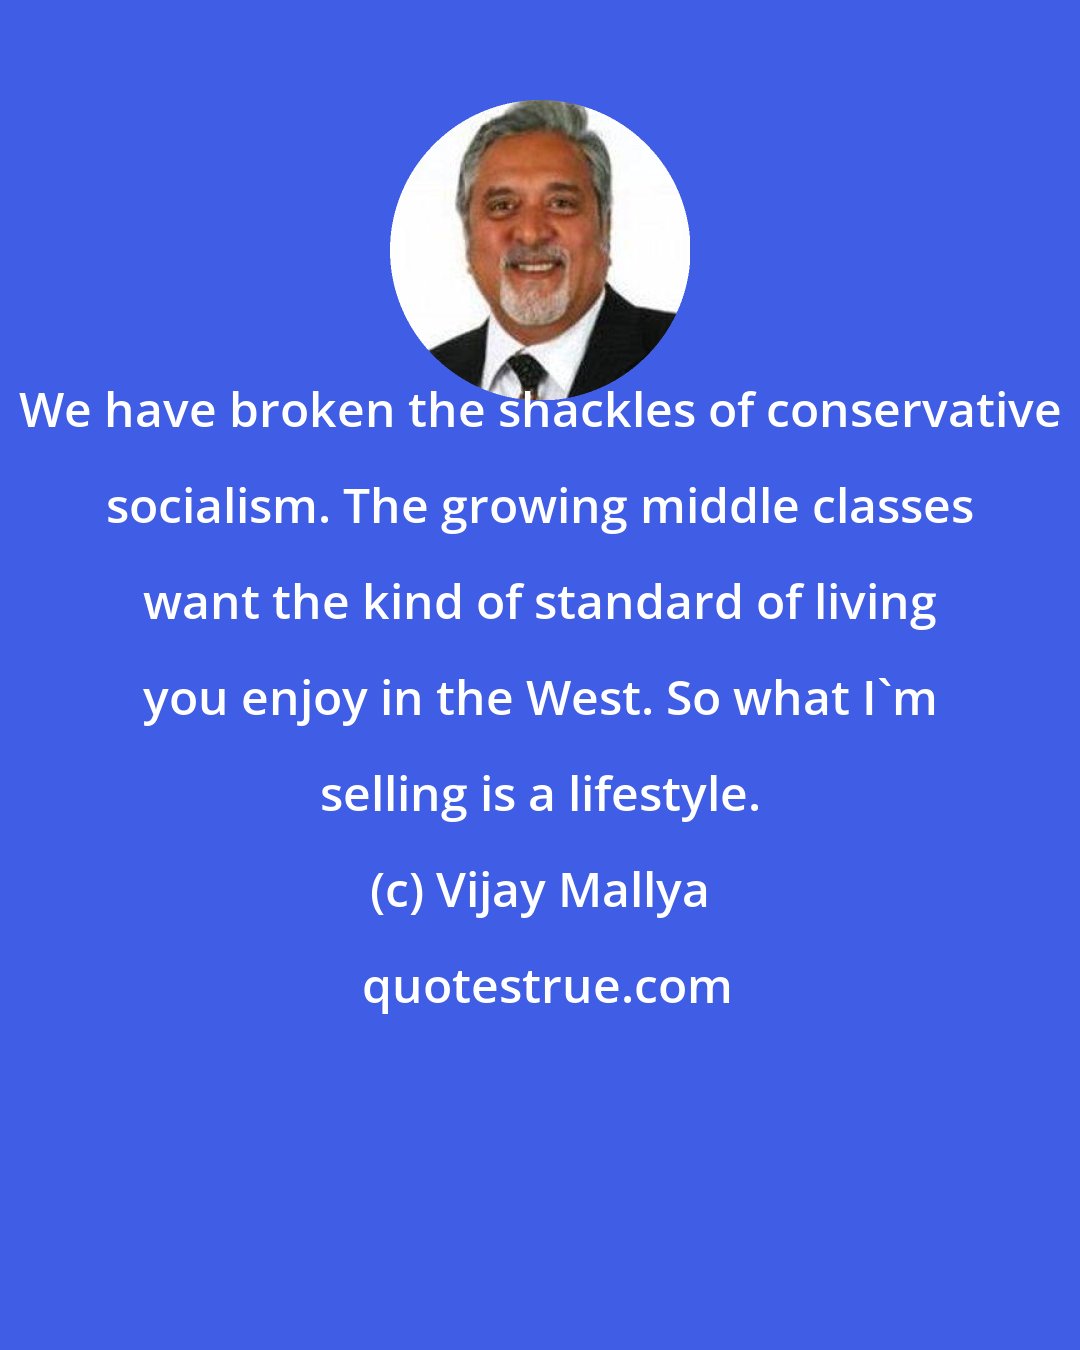 Vijay Mallya: We have broken the shackles of conservative socialism. The growing middle classes want the kind of standard of living you enjoy in the West. So what I'm selling is a lifestyle.